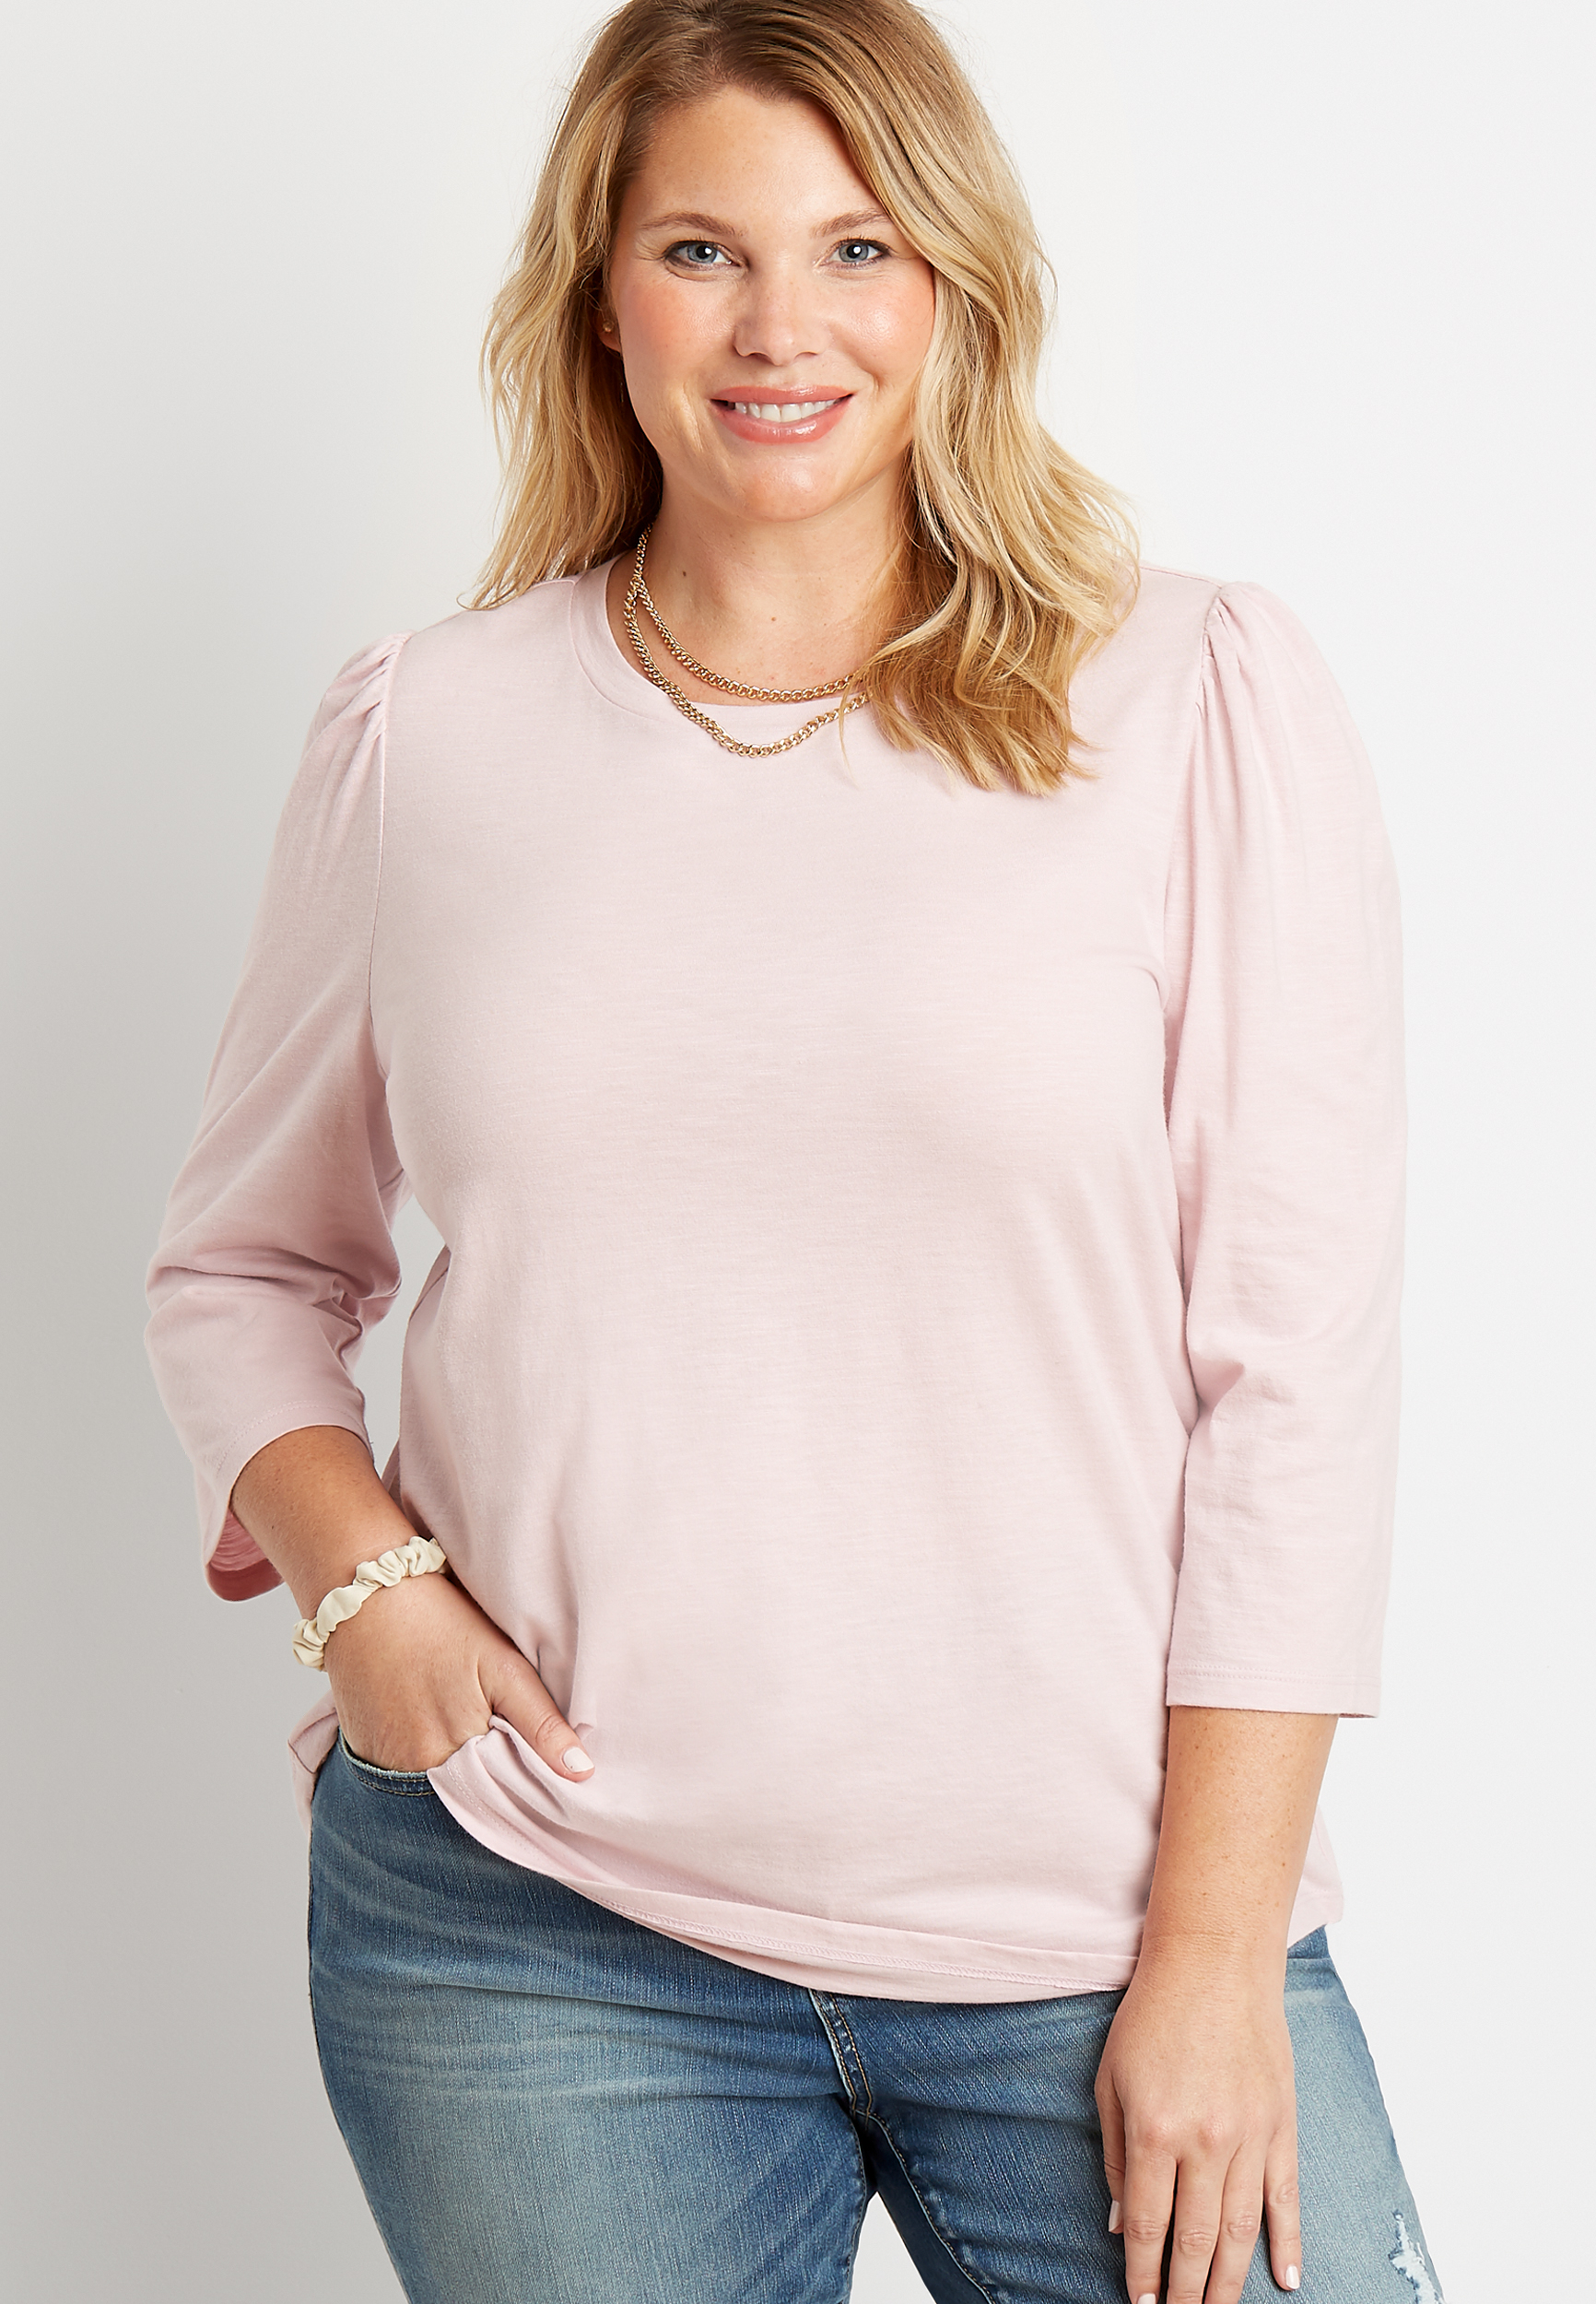 Plus Size 24/7 Light Pink Puff 3/4 Sleeve Tee | maurices